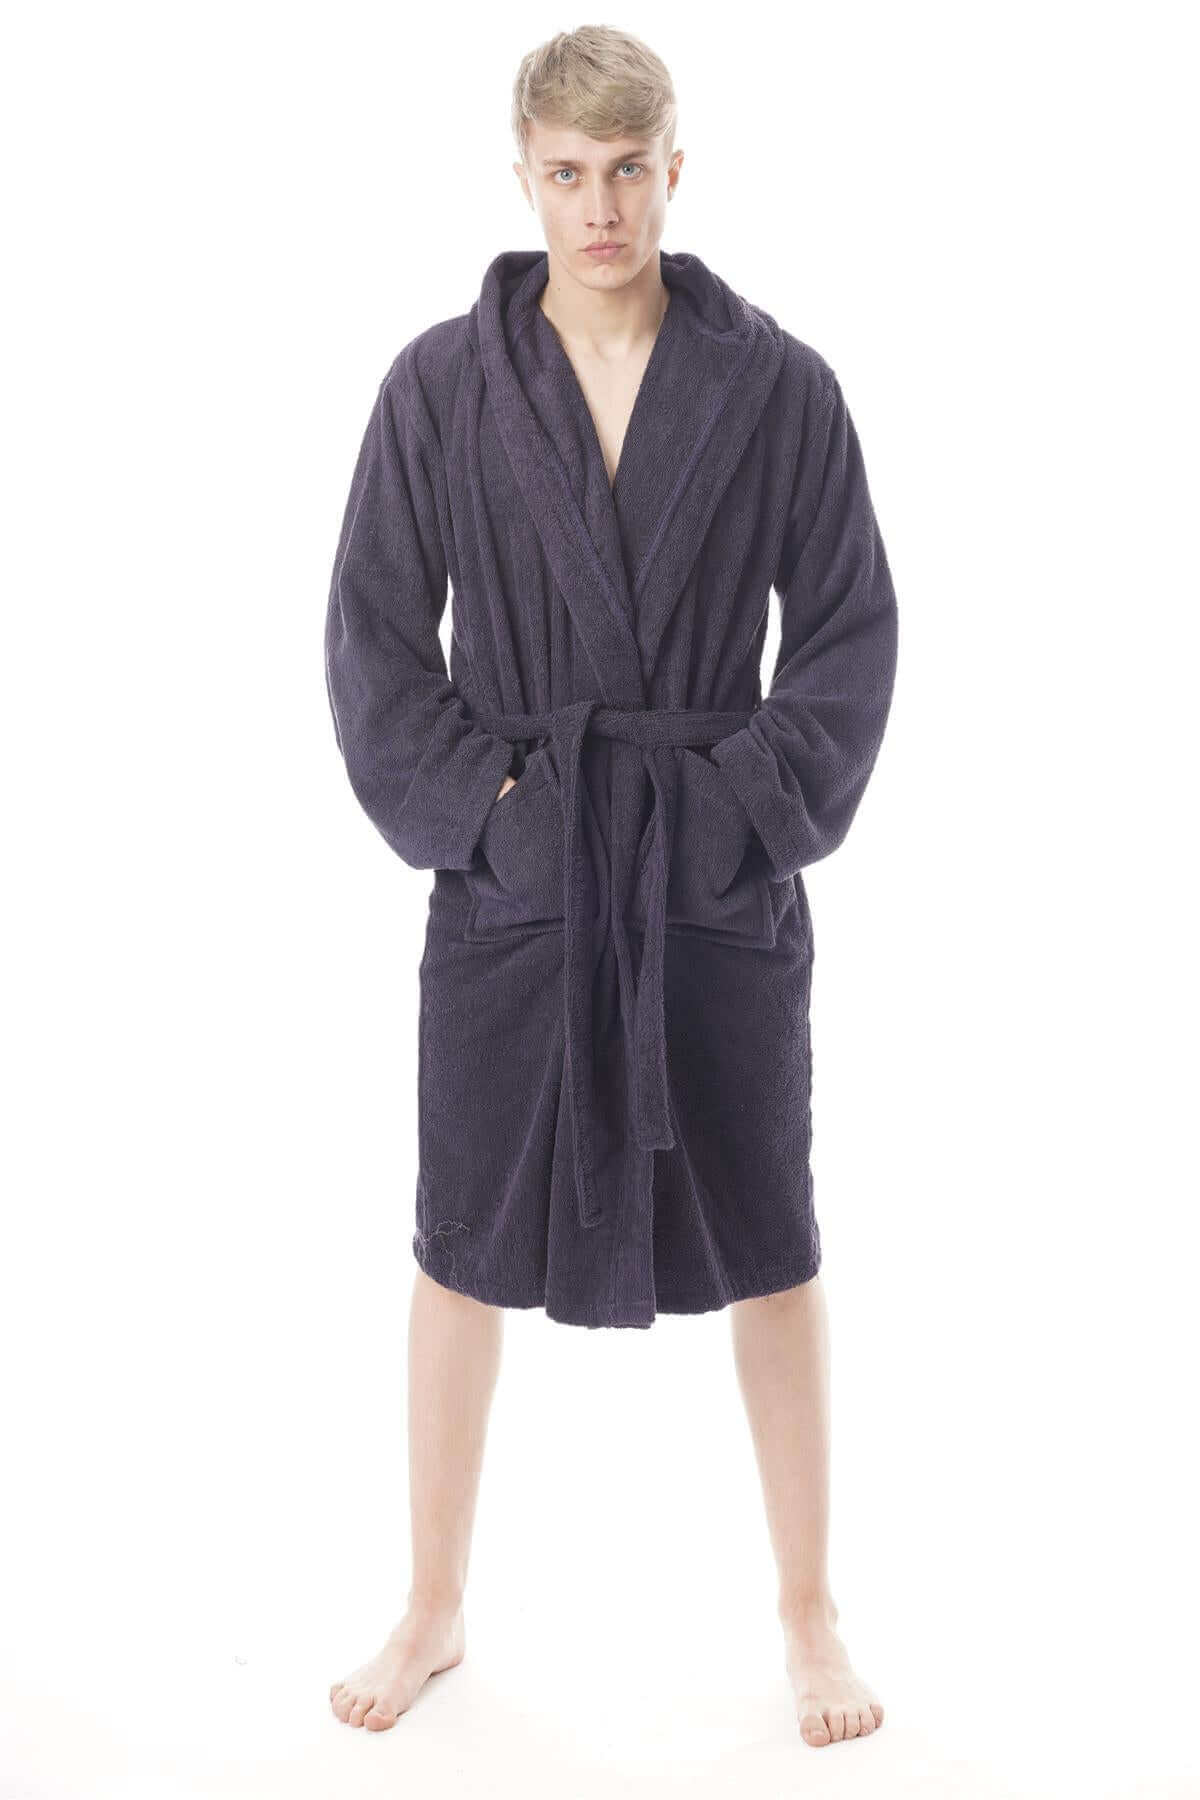 Men's Hooded Robe Super Soft Long Terry Towelling Bathrobe Dressing Gown. Buy now for £15.00. A Robe by Toro Rocco. assorted, bathrobe, black, charcoal, comfortable, cotton, dressing gown, fleece, gym, hooded, hoodie, hotel, large, loungewear, medium, men